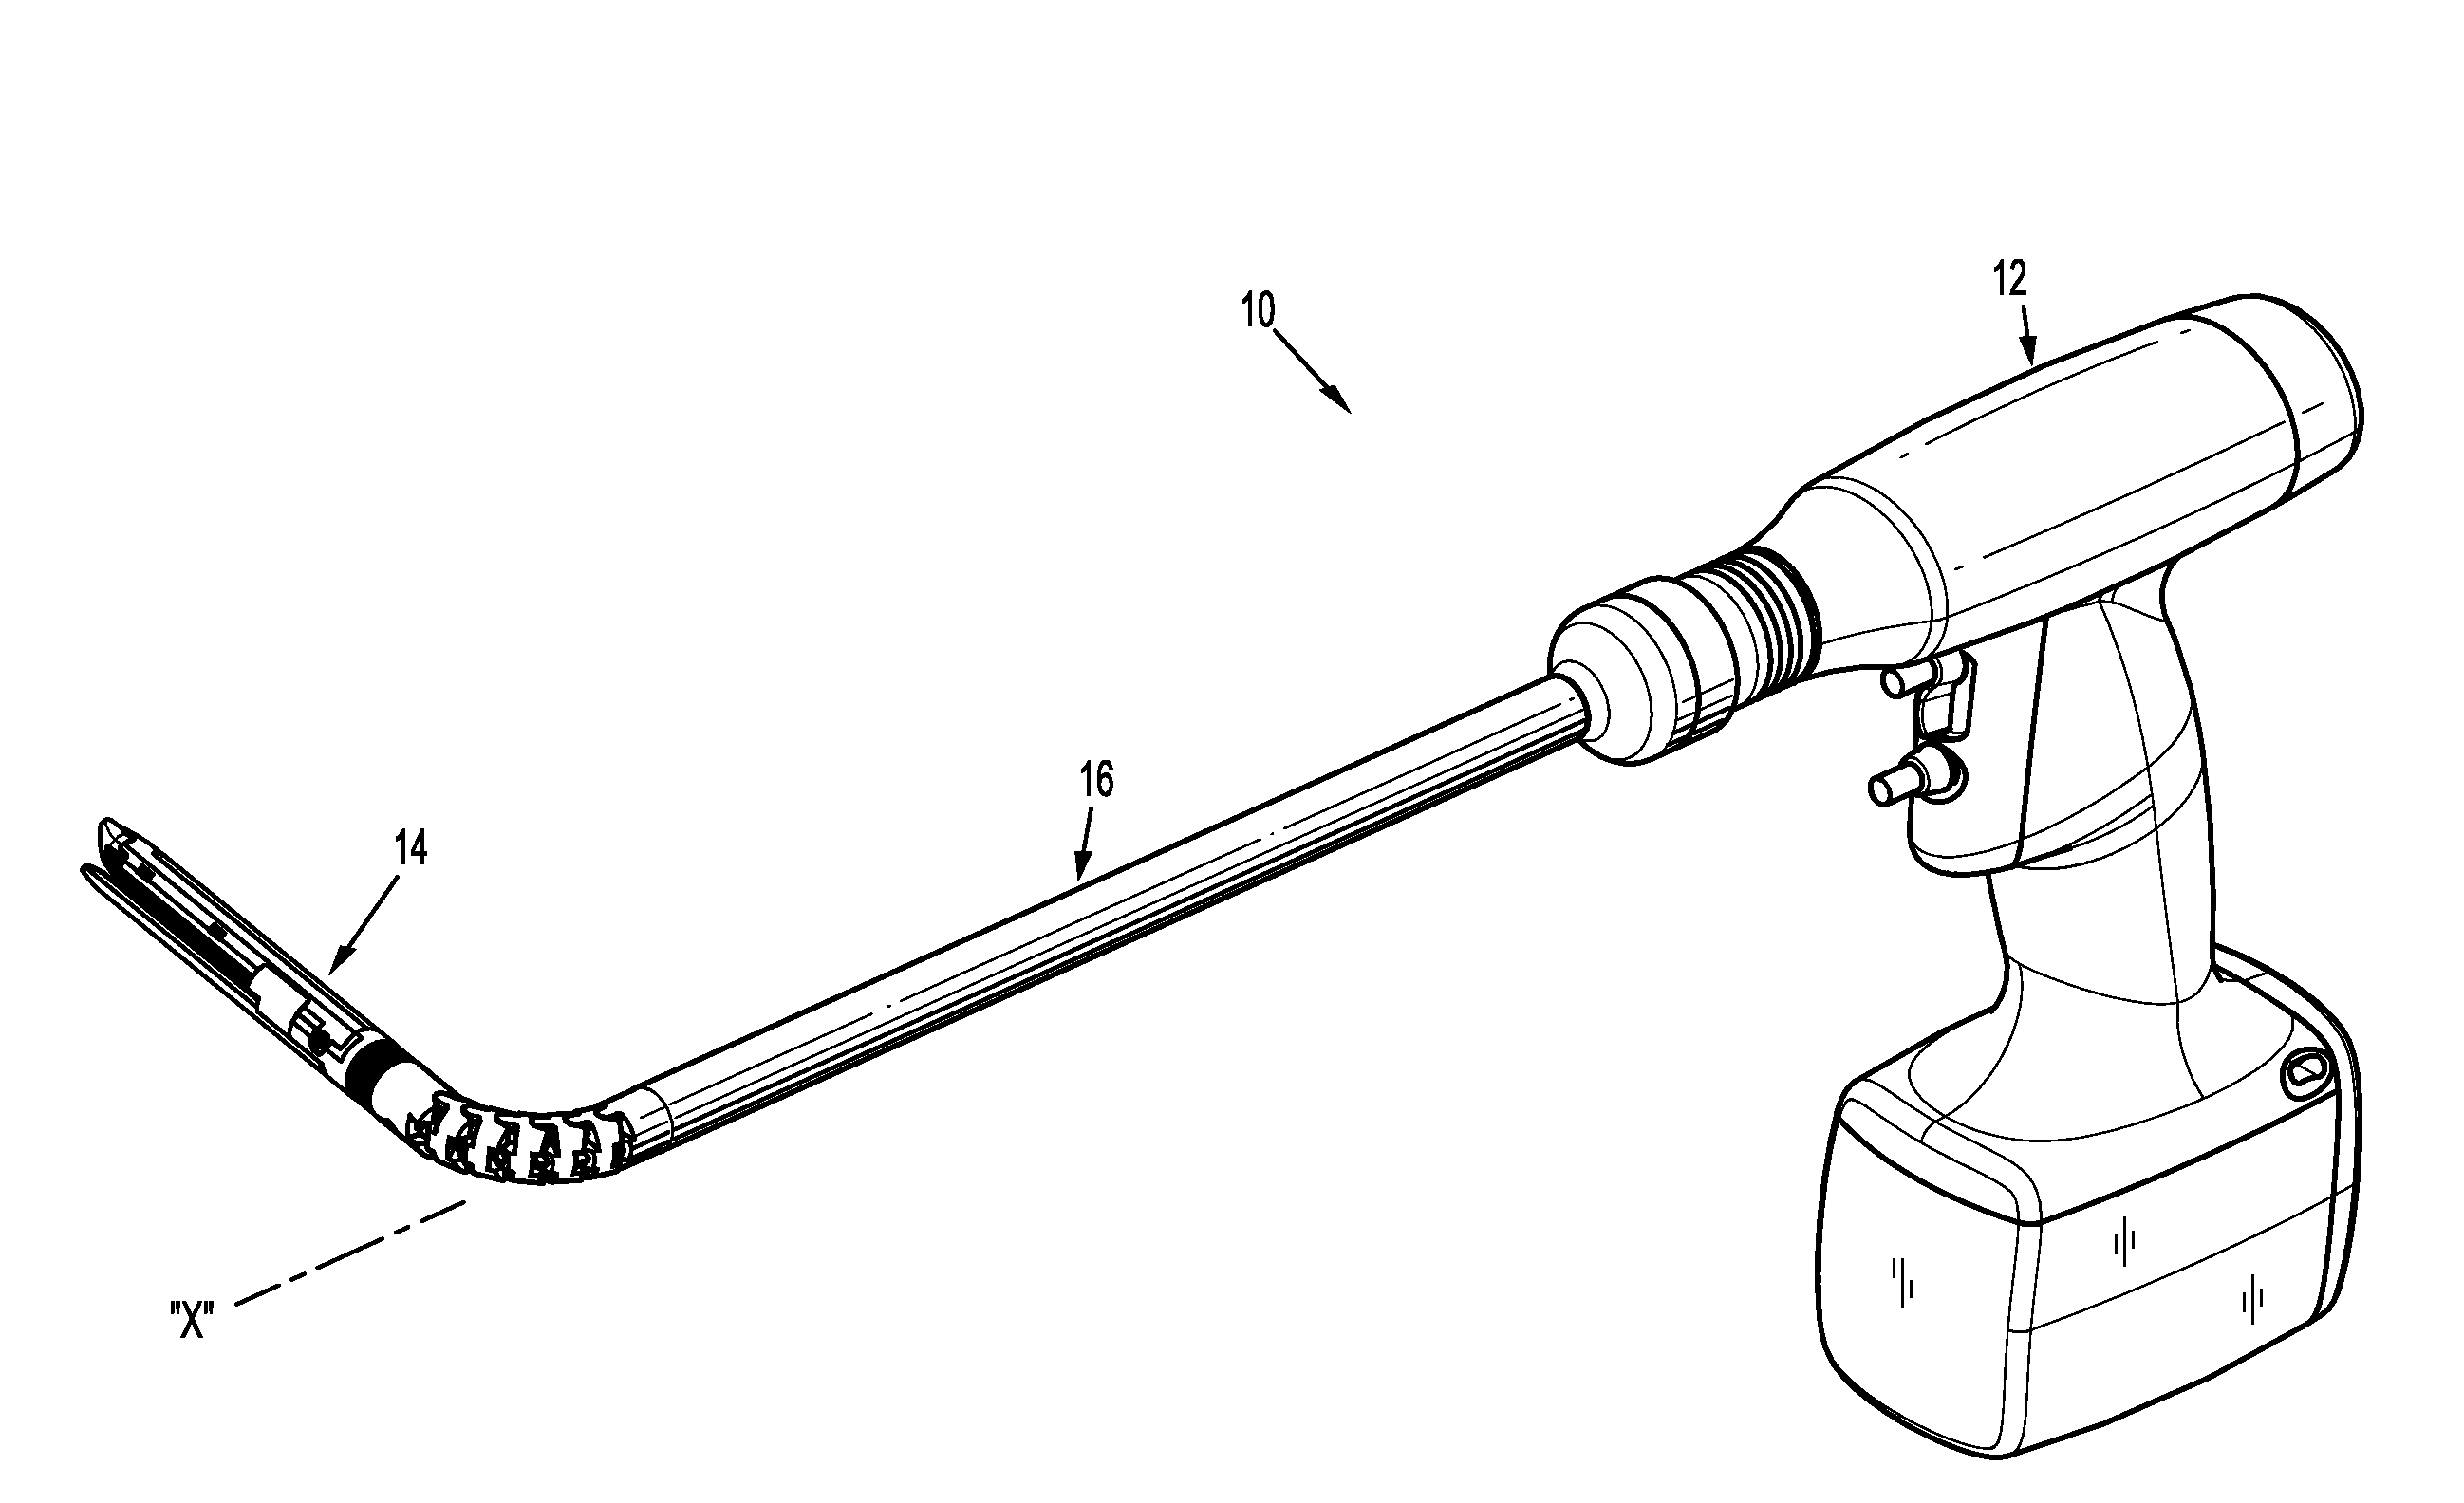 Systems and methods for determining an end of life state for surgical devices